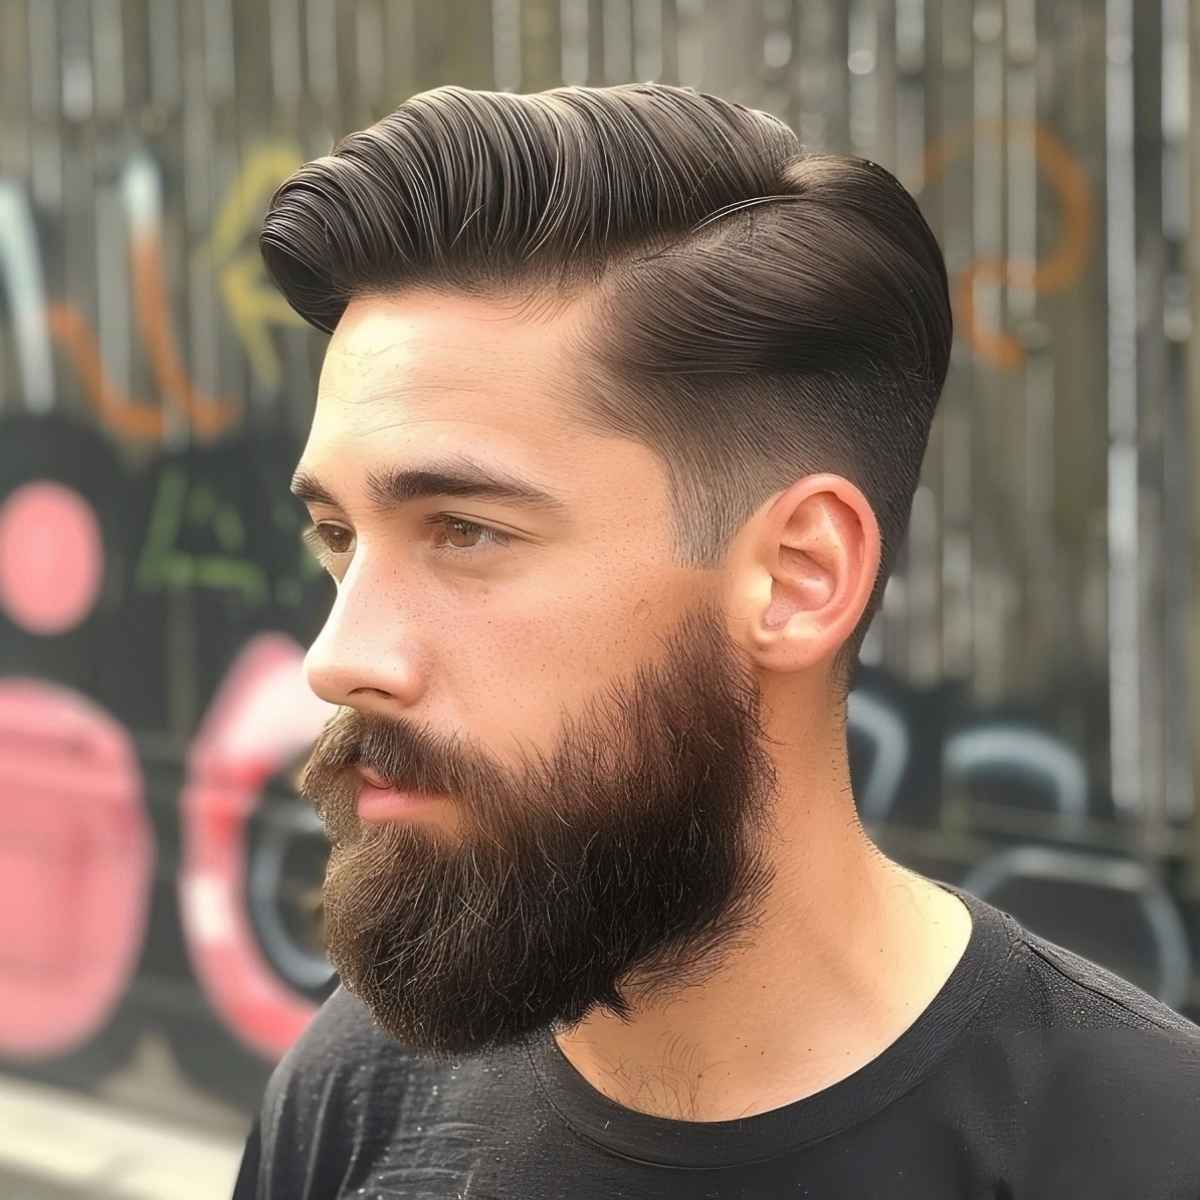 Cool Side Parted Pompadour with a beard